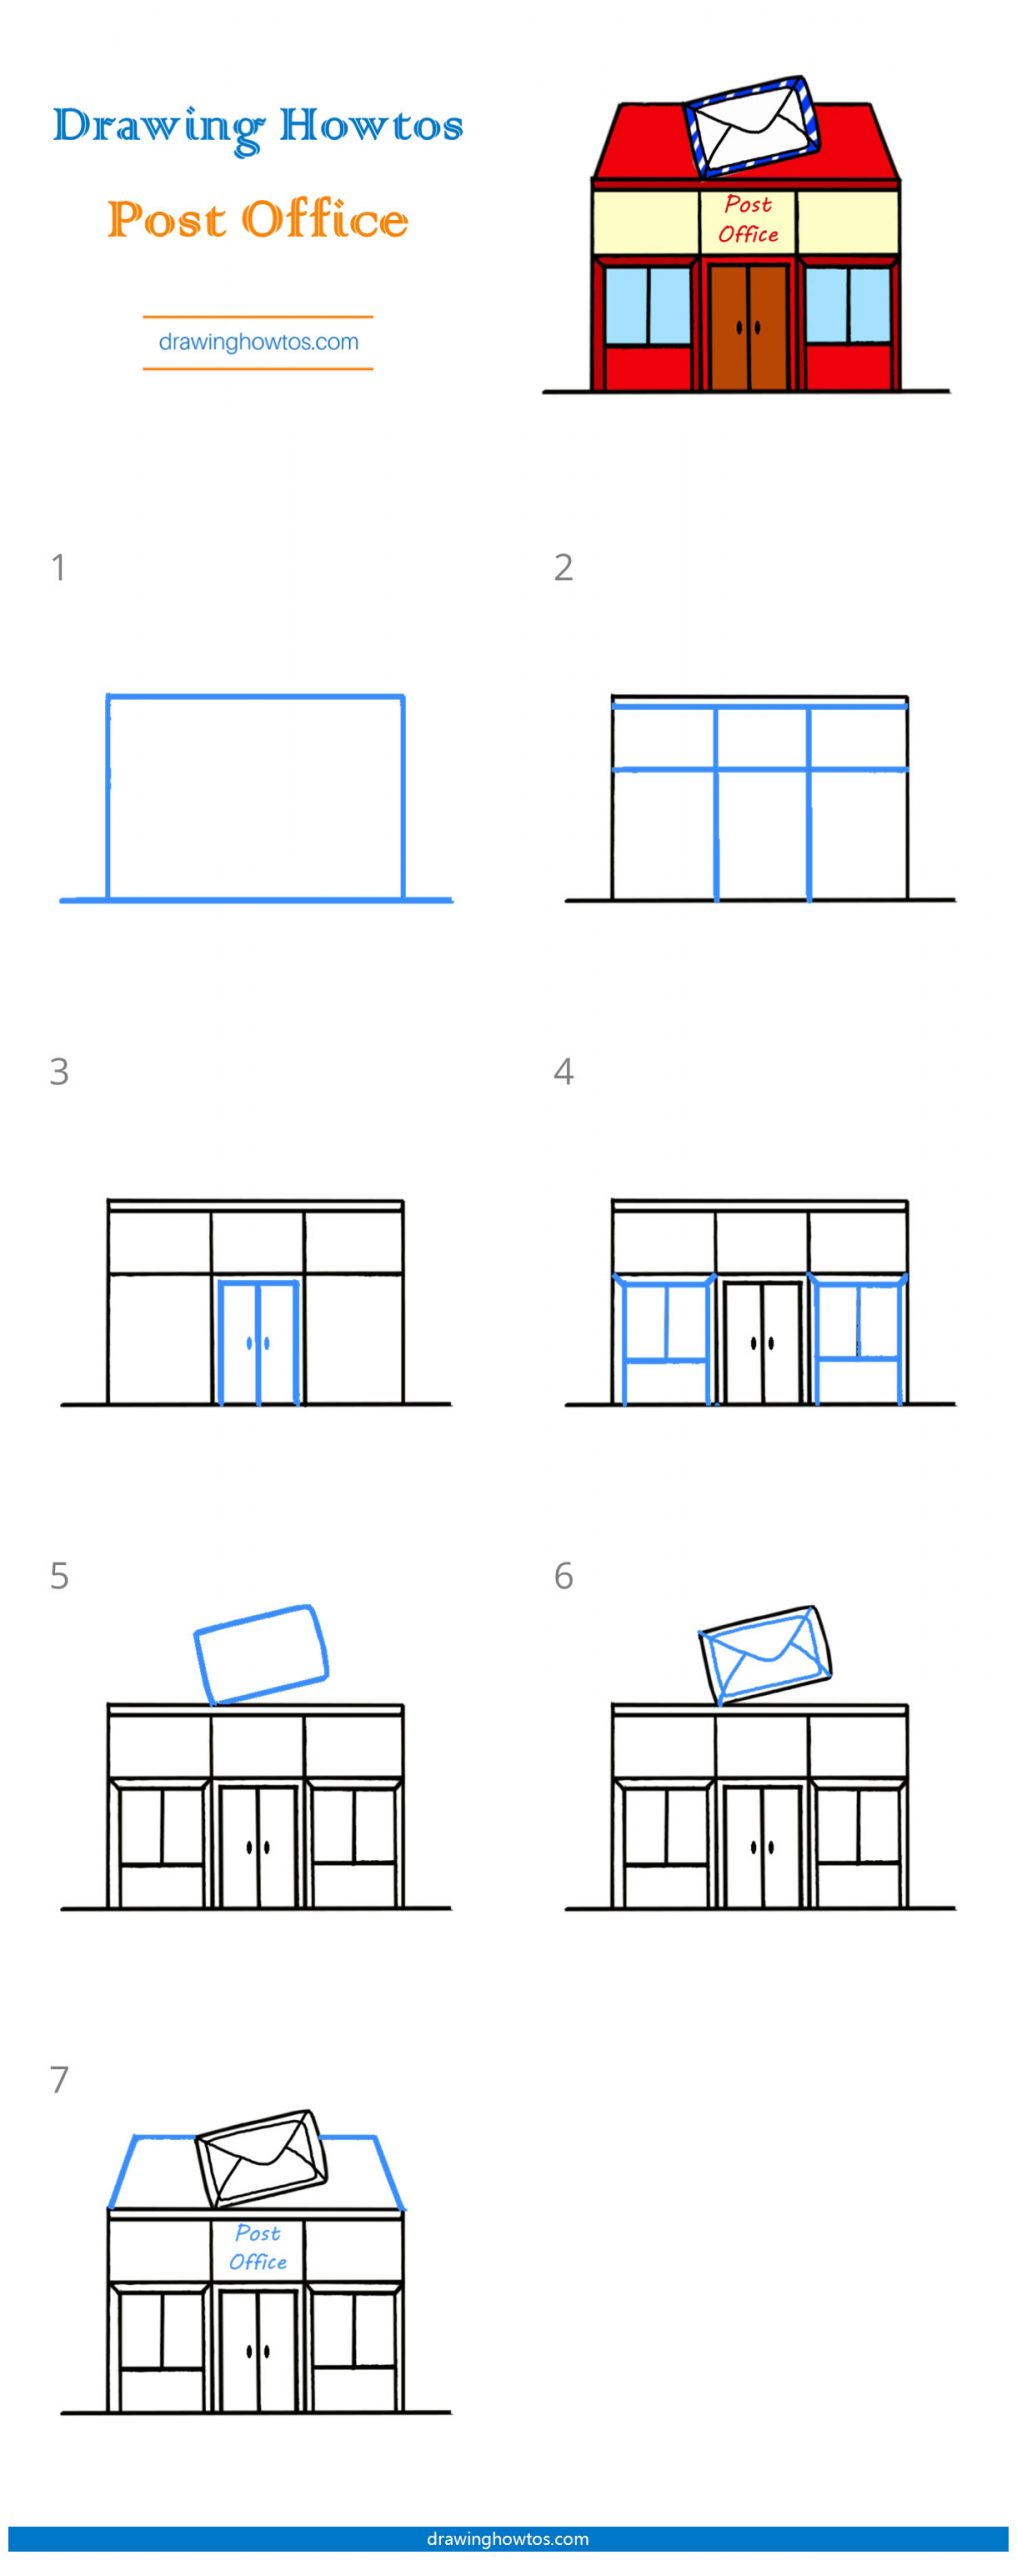 How to Draw a Post Office Step by Step